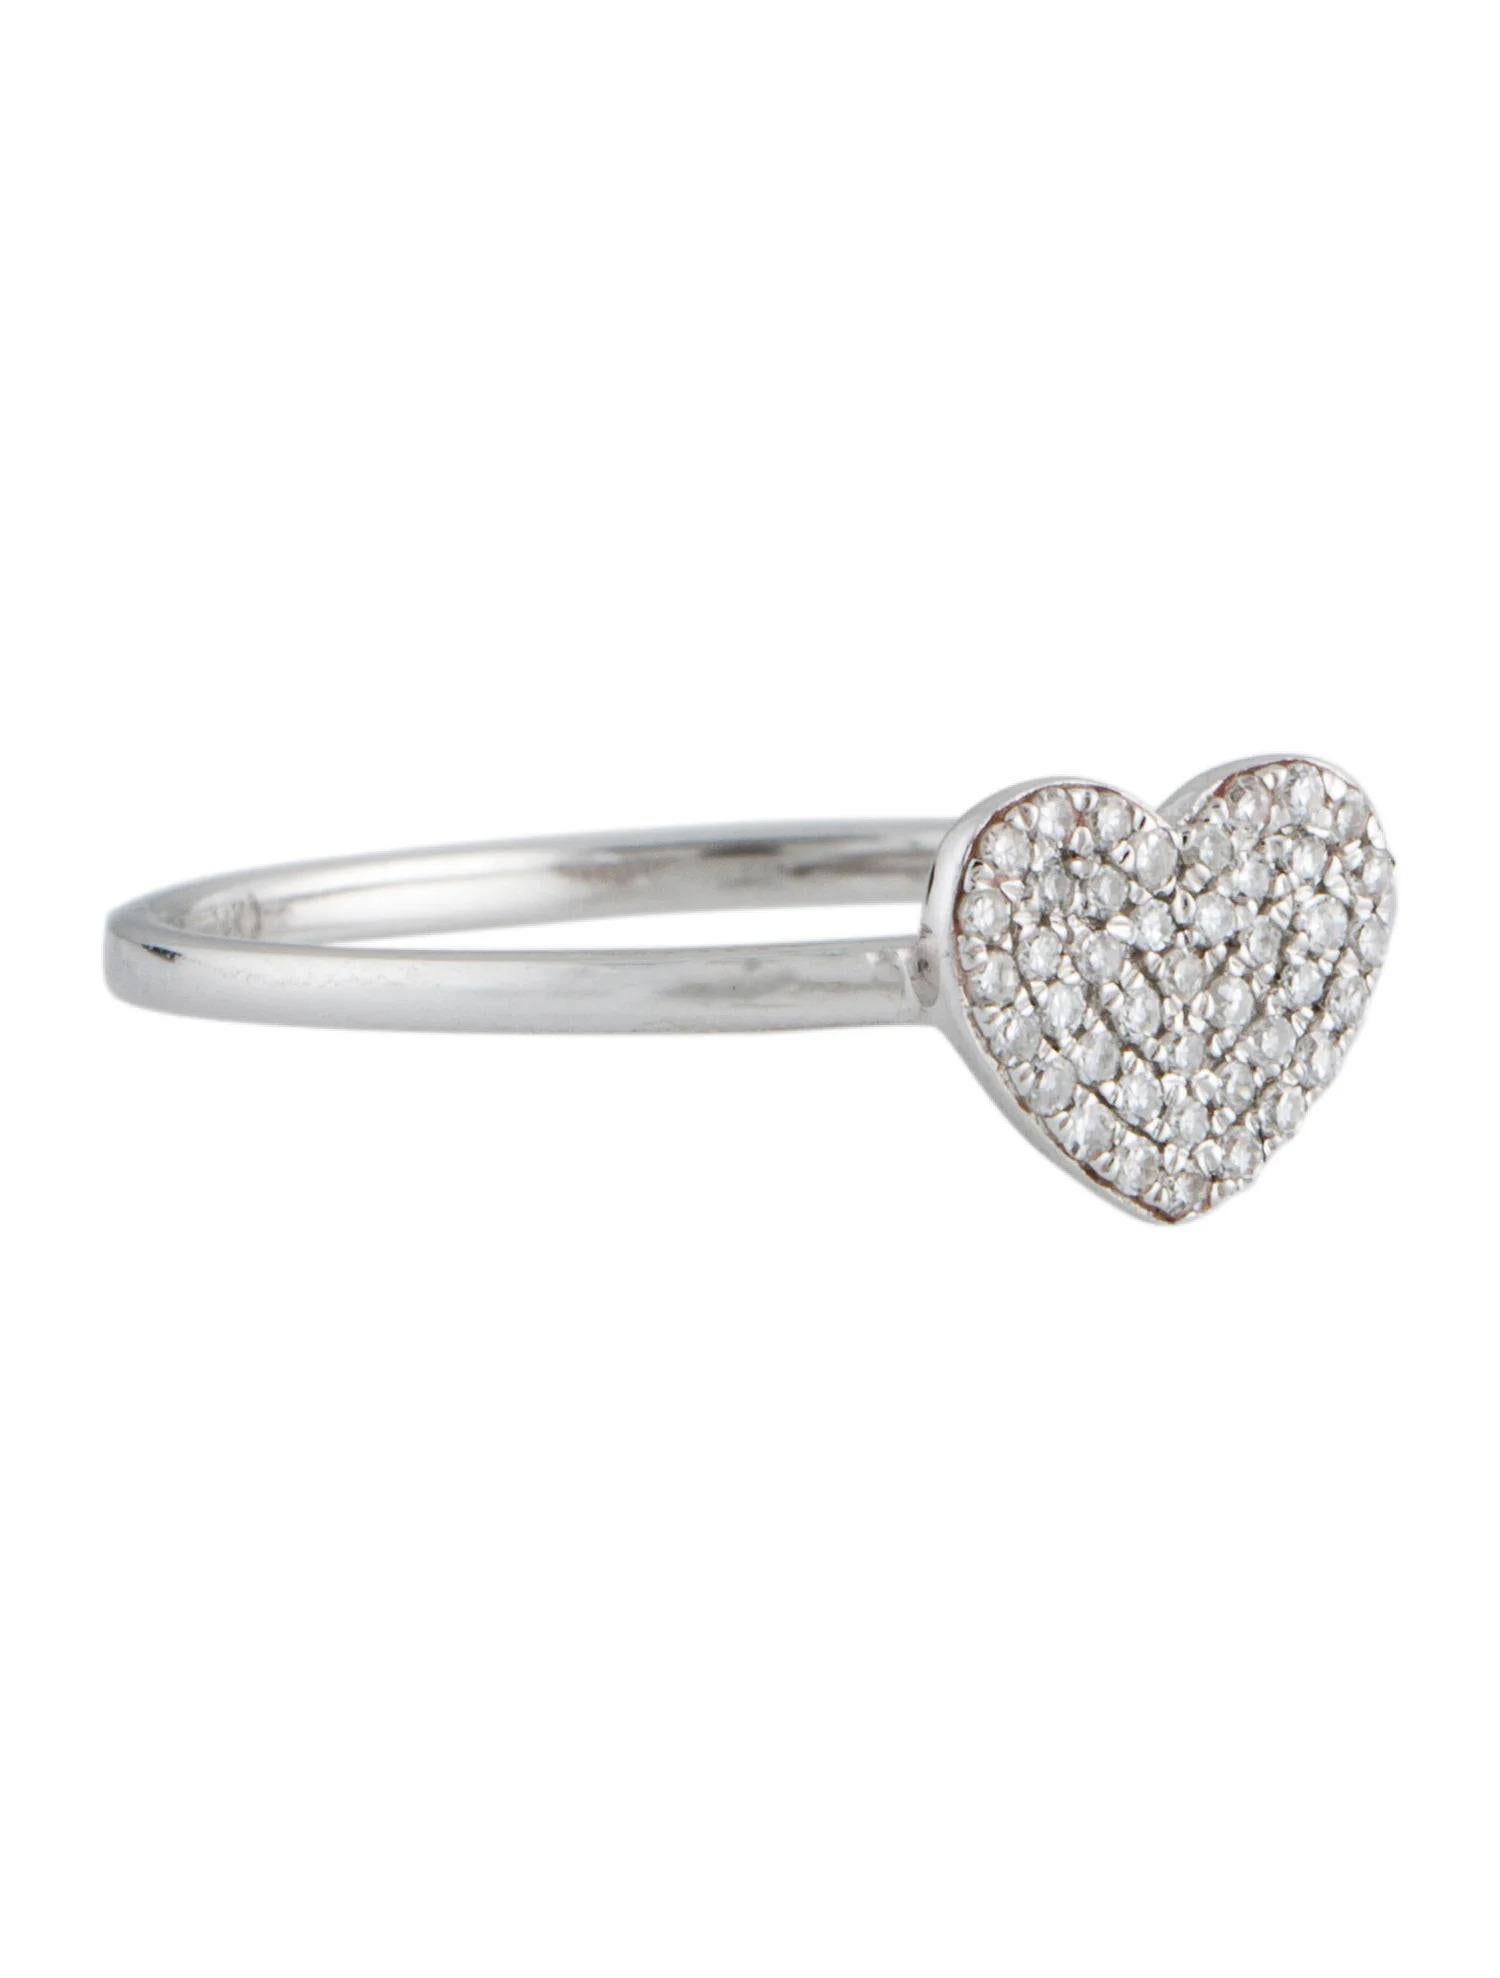 This stunning ring features a beautiful Heart Cluster of White Diamonds,.
This ring is set in 14K White Gold. Total Diamond Weight = 0.13 Carats. Ring Size is 6 1/2.